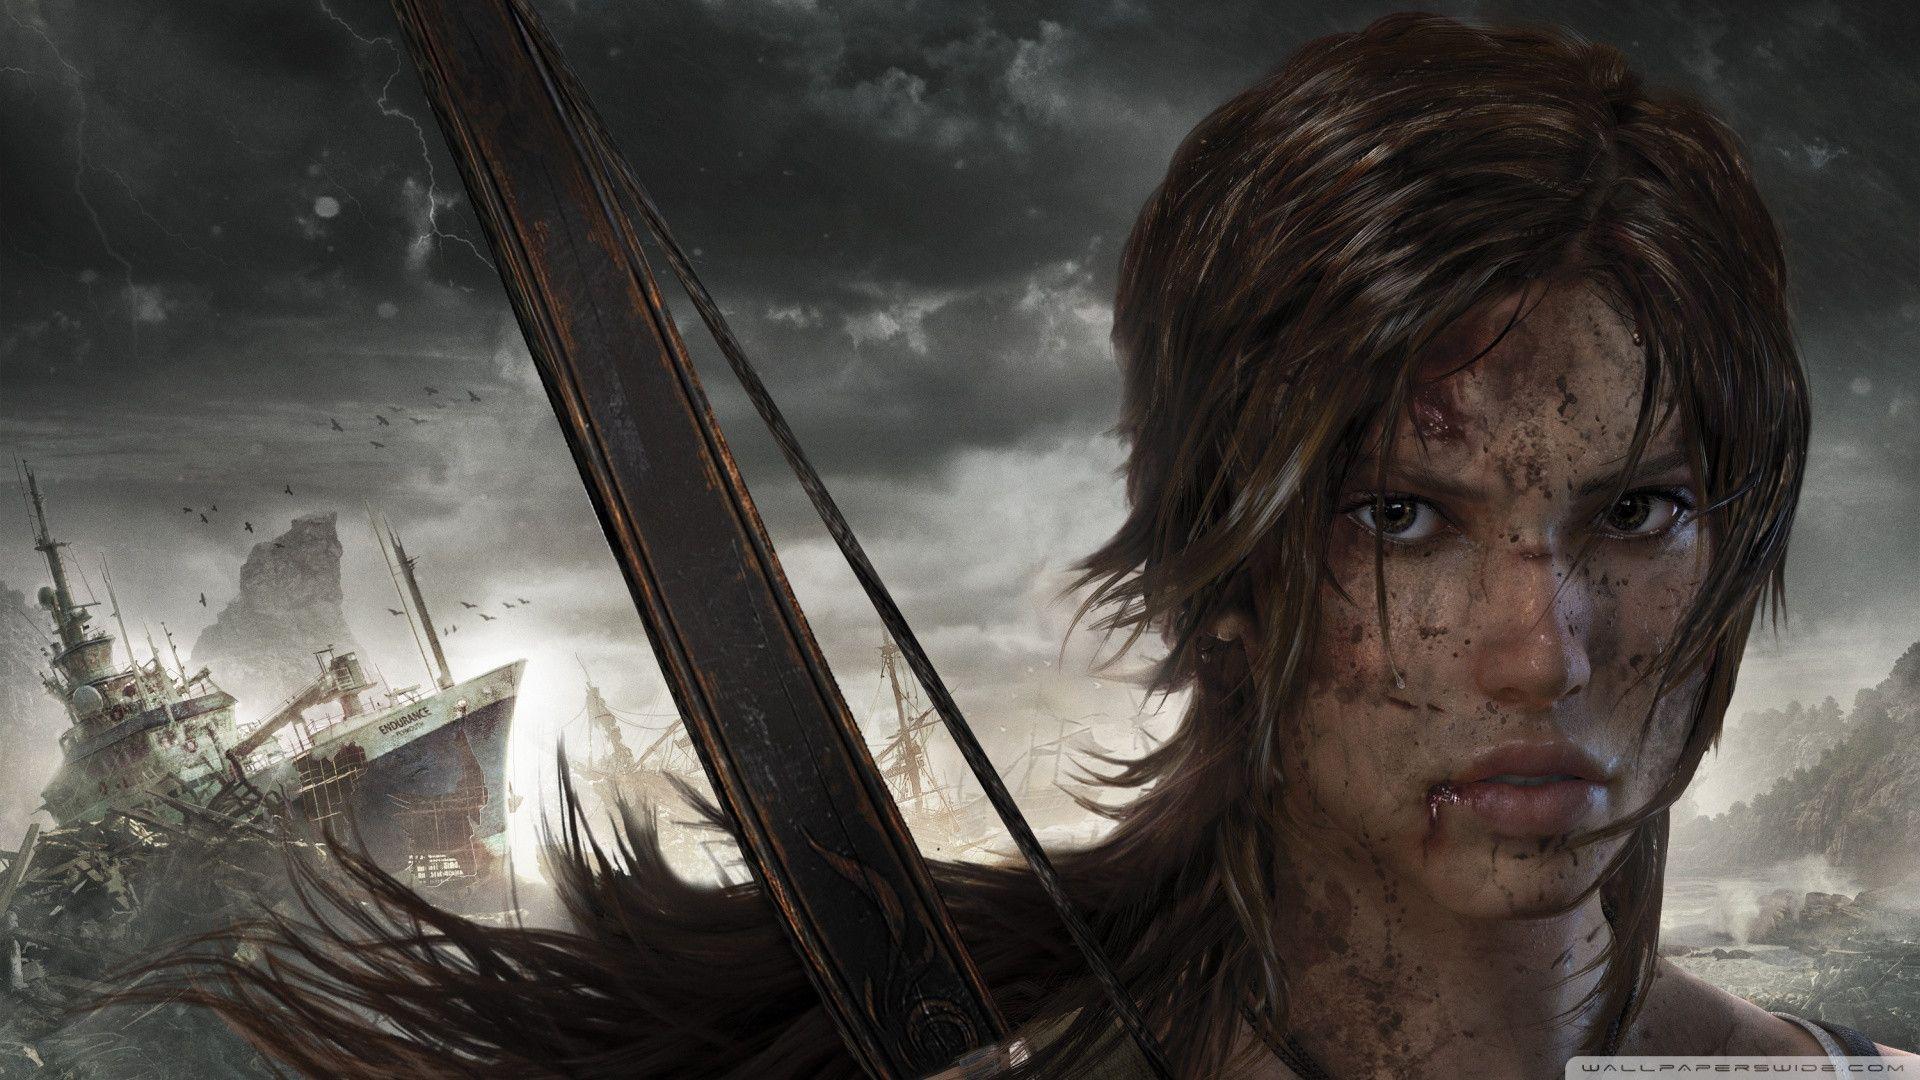 Rise of the Tomb Raider coming winter 2015